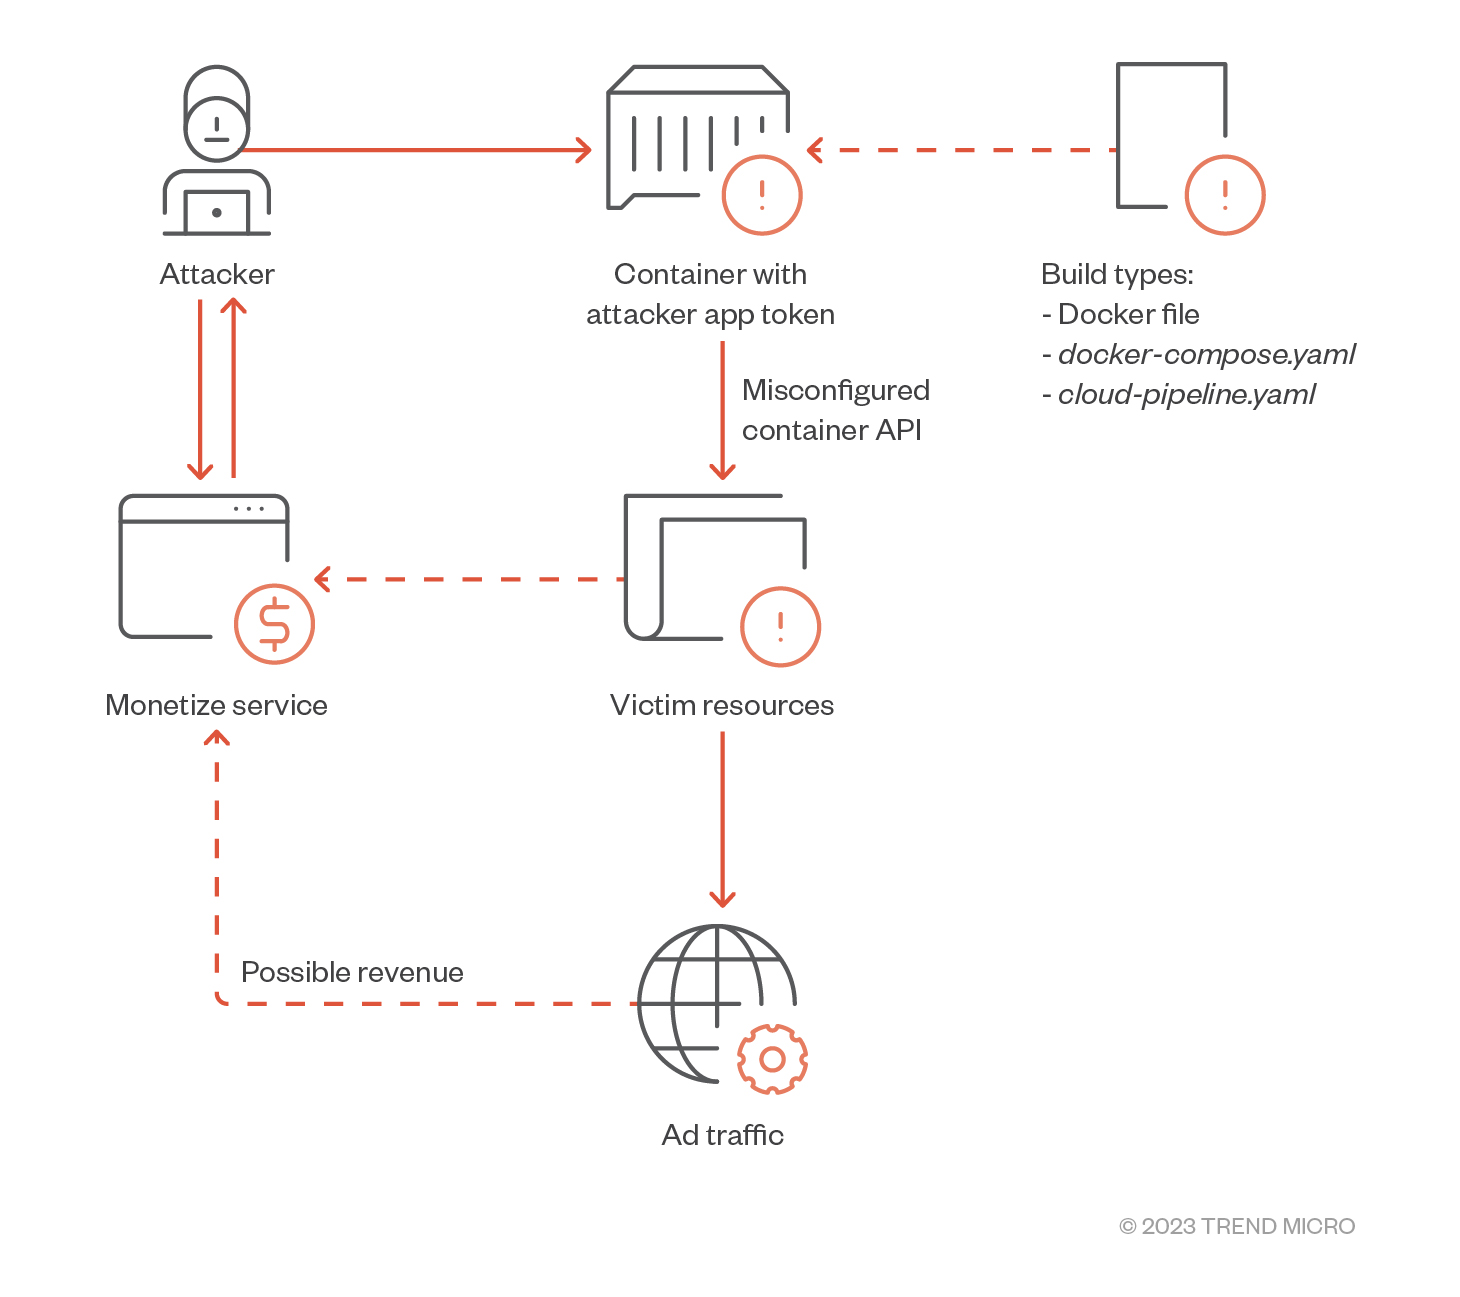 fig3-attackers-use-containers-for-profit-via-trafficstealer